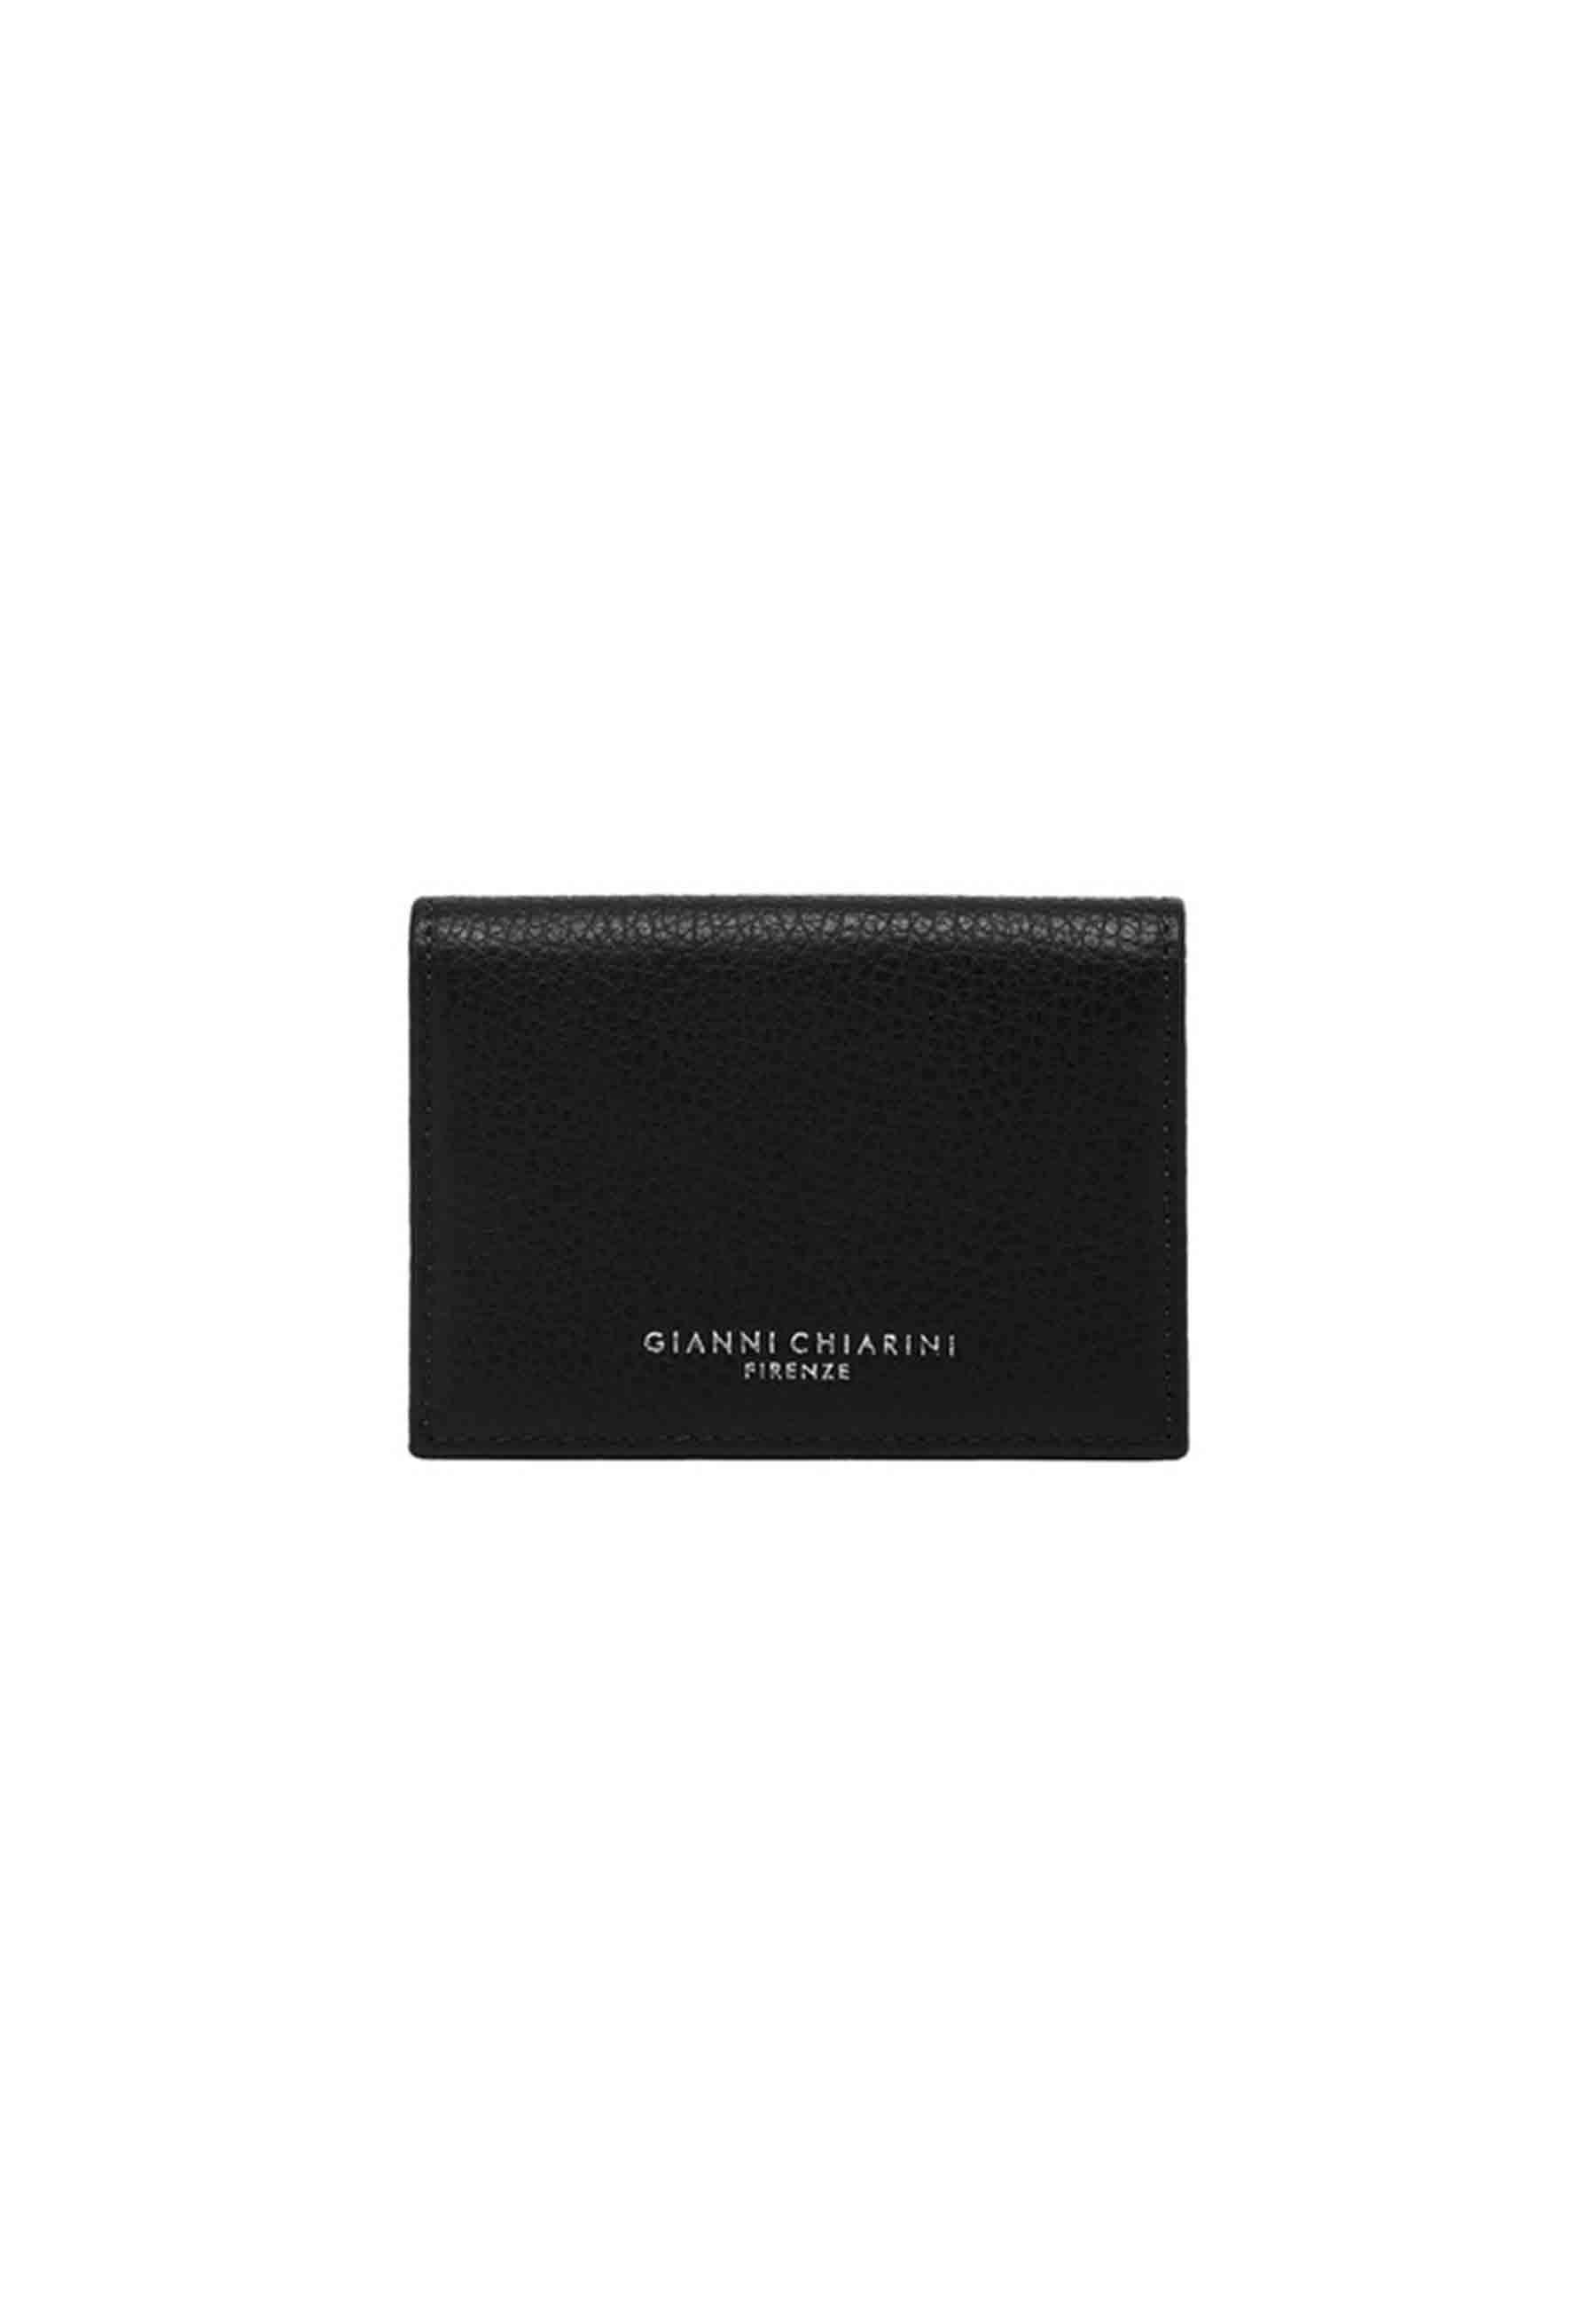 Women's card holder in black grained leather with button closure